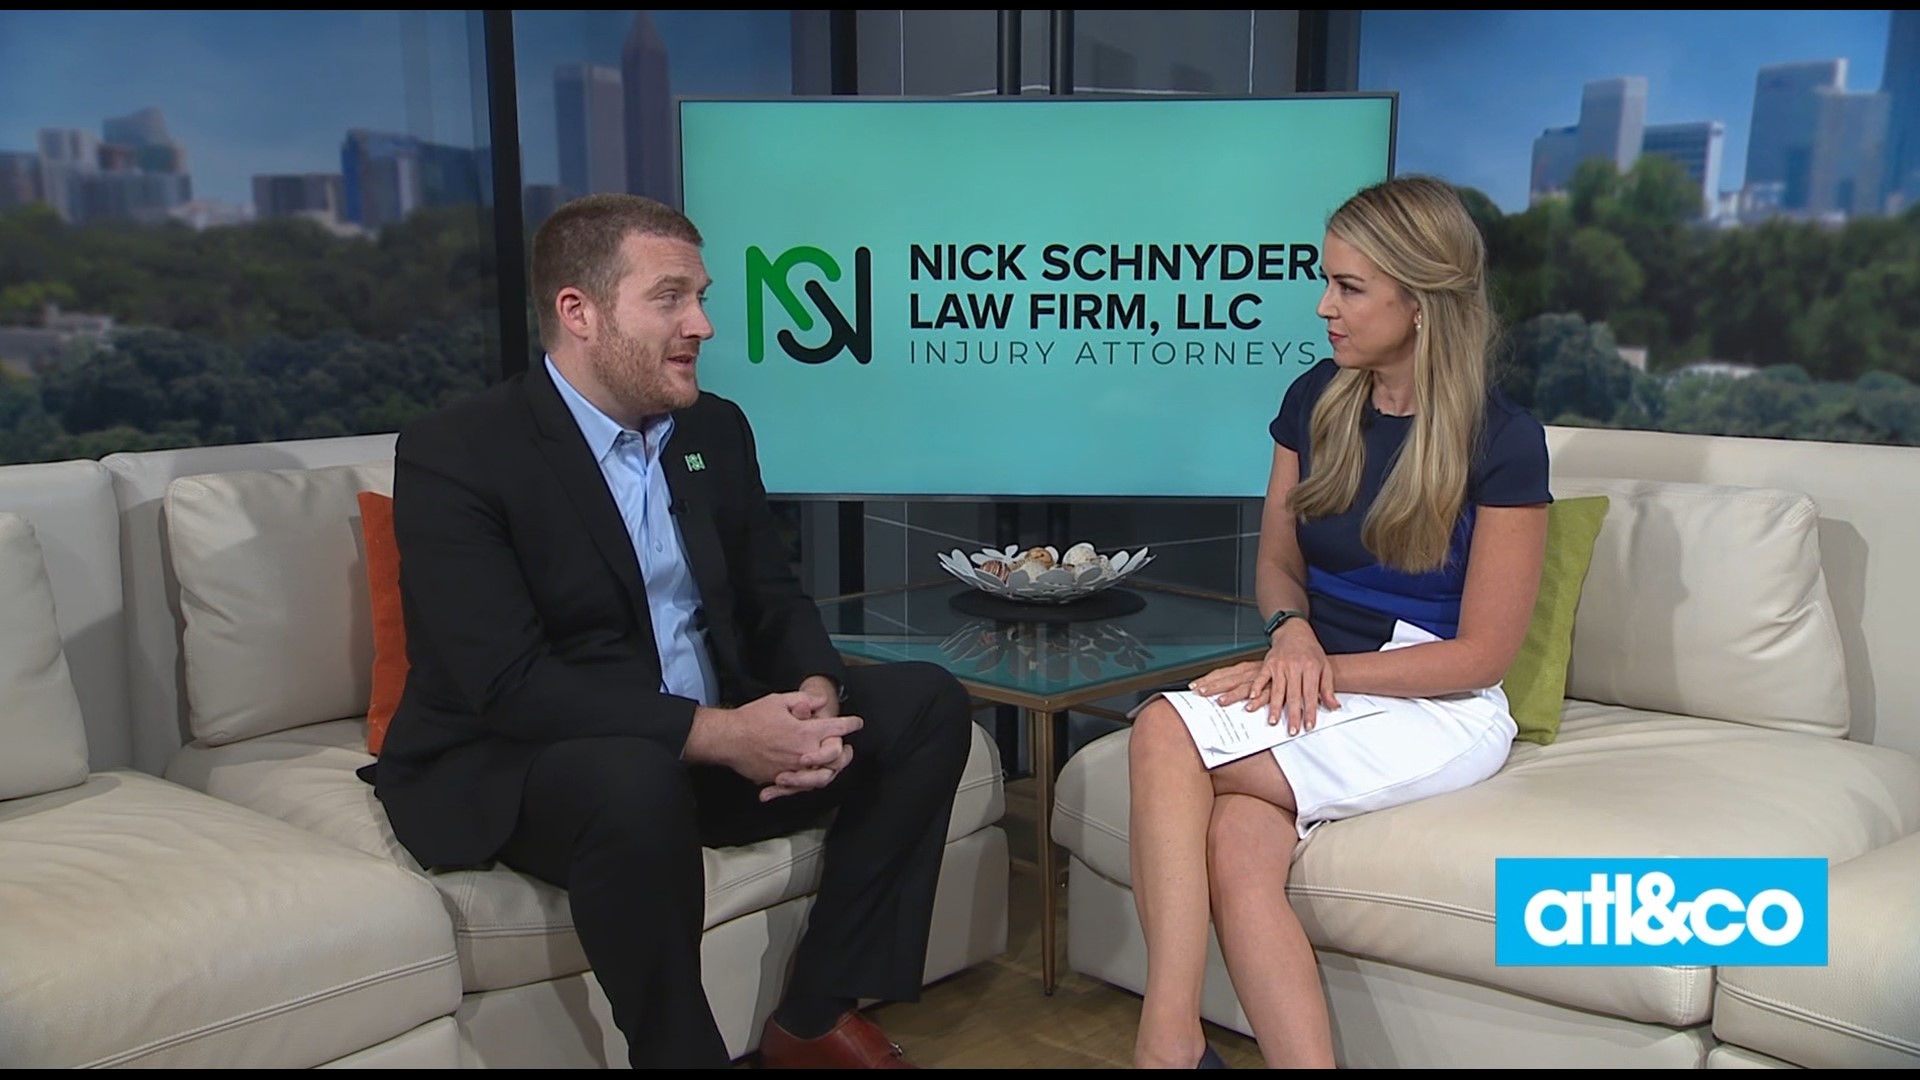 Call Atlanta's trusted personal injury law team. Find out how they can help you. Call 404.999.1111 or learn more at SchnyderLawFirm.com | Paid Content